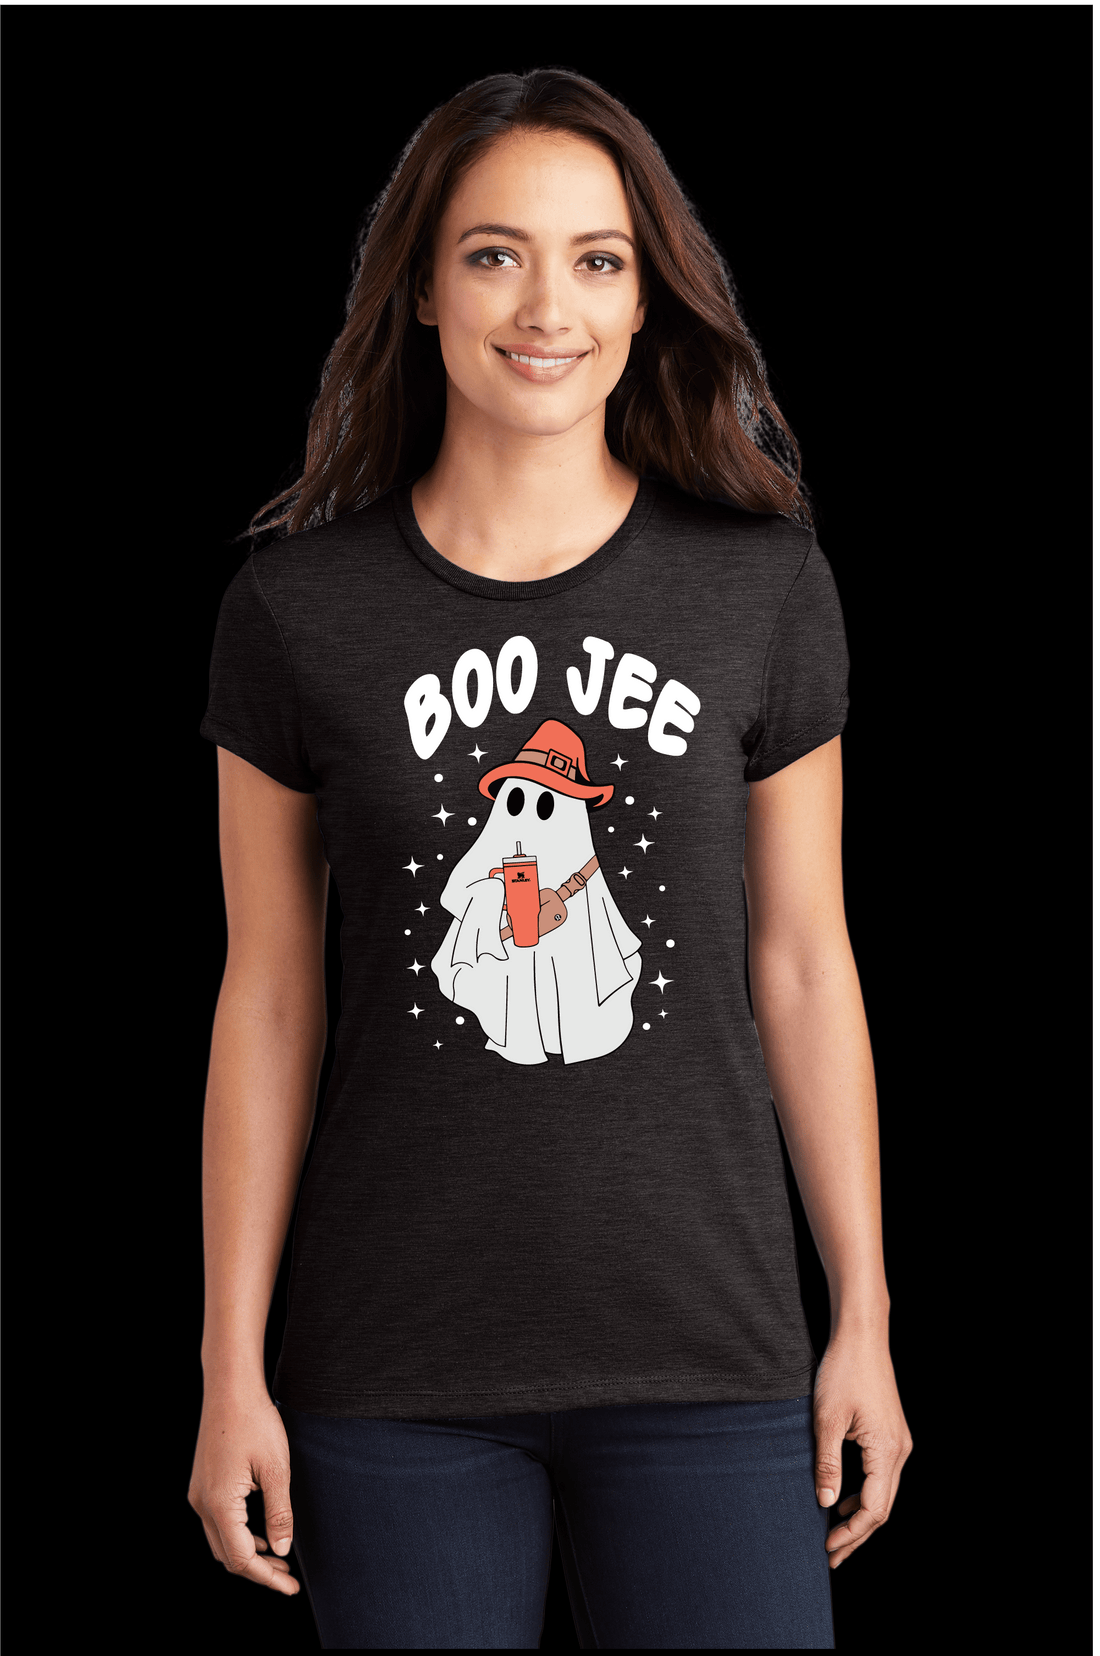 Elevate Your Haunting Game with Our "Boo Jee" T-Shirt! ✨🎃